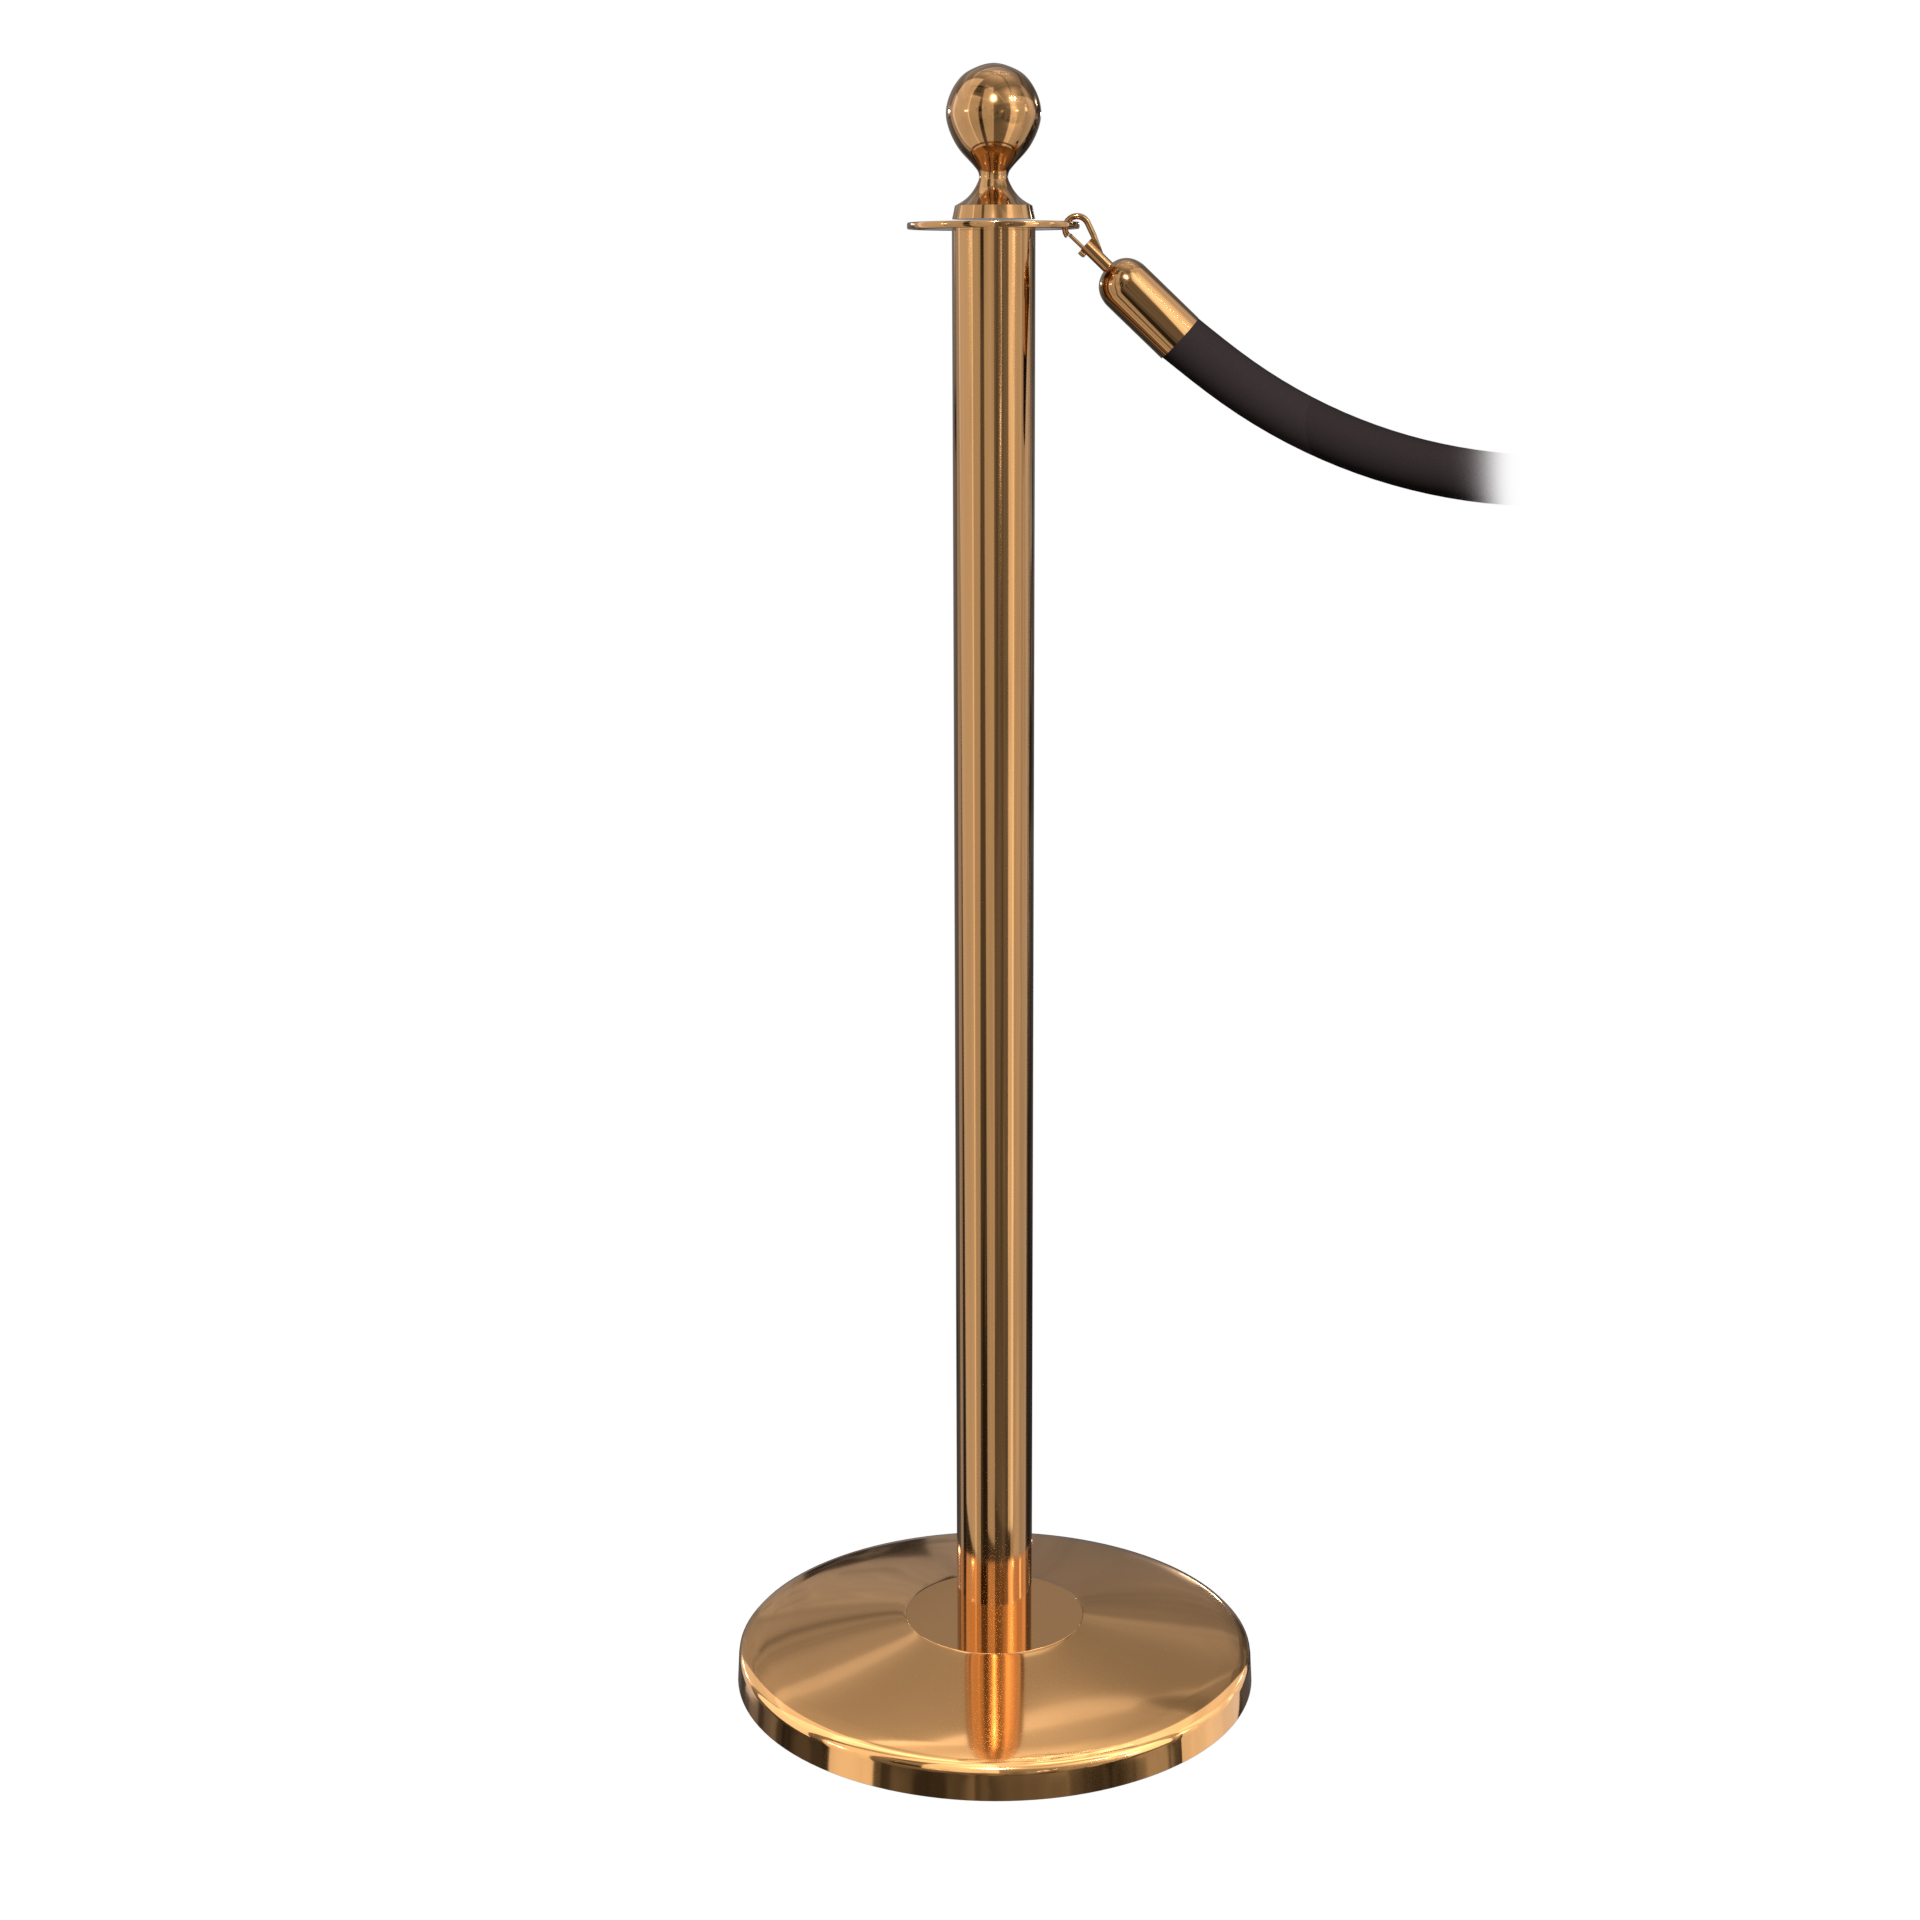 Polished Brass Economy Classic Stanchion with Ball Top